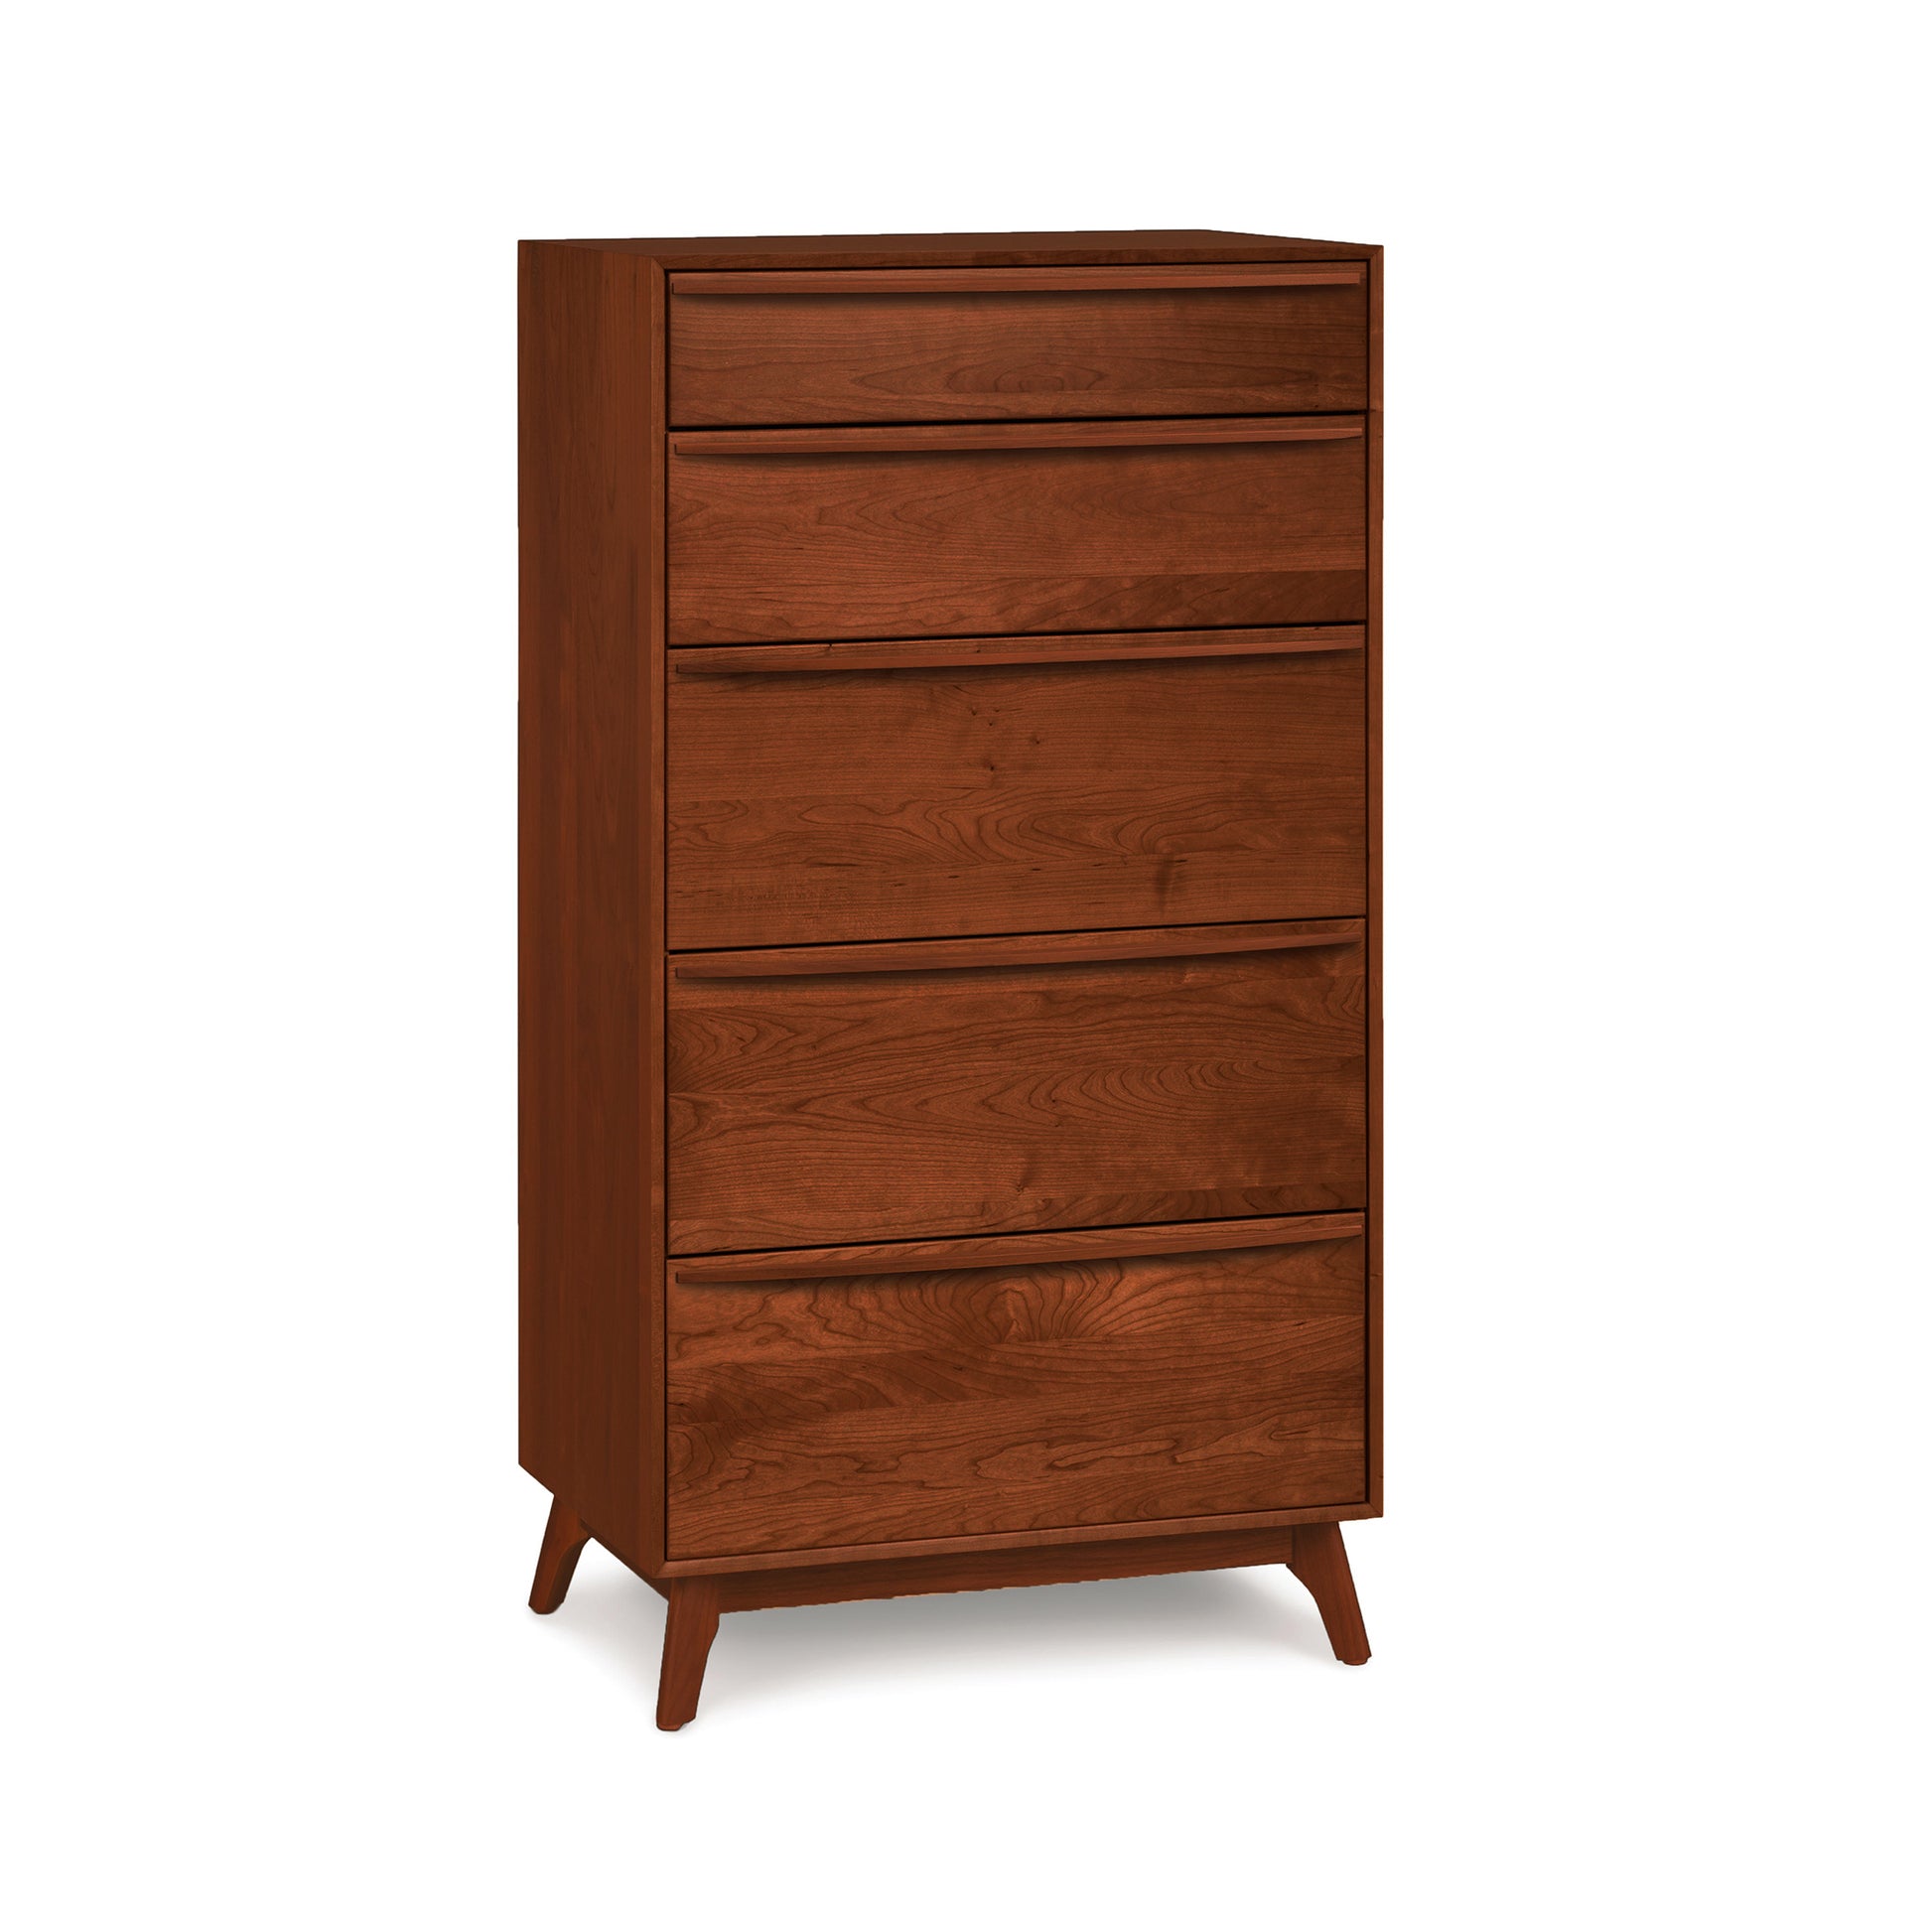 A solid wood construction five-drawer Catalina 5-Drawer Chest standing against a white background from the Copeland Furniture Bedroom Furniture Collection.